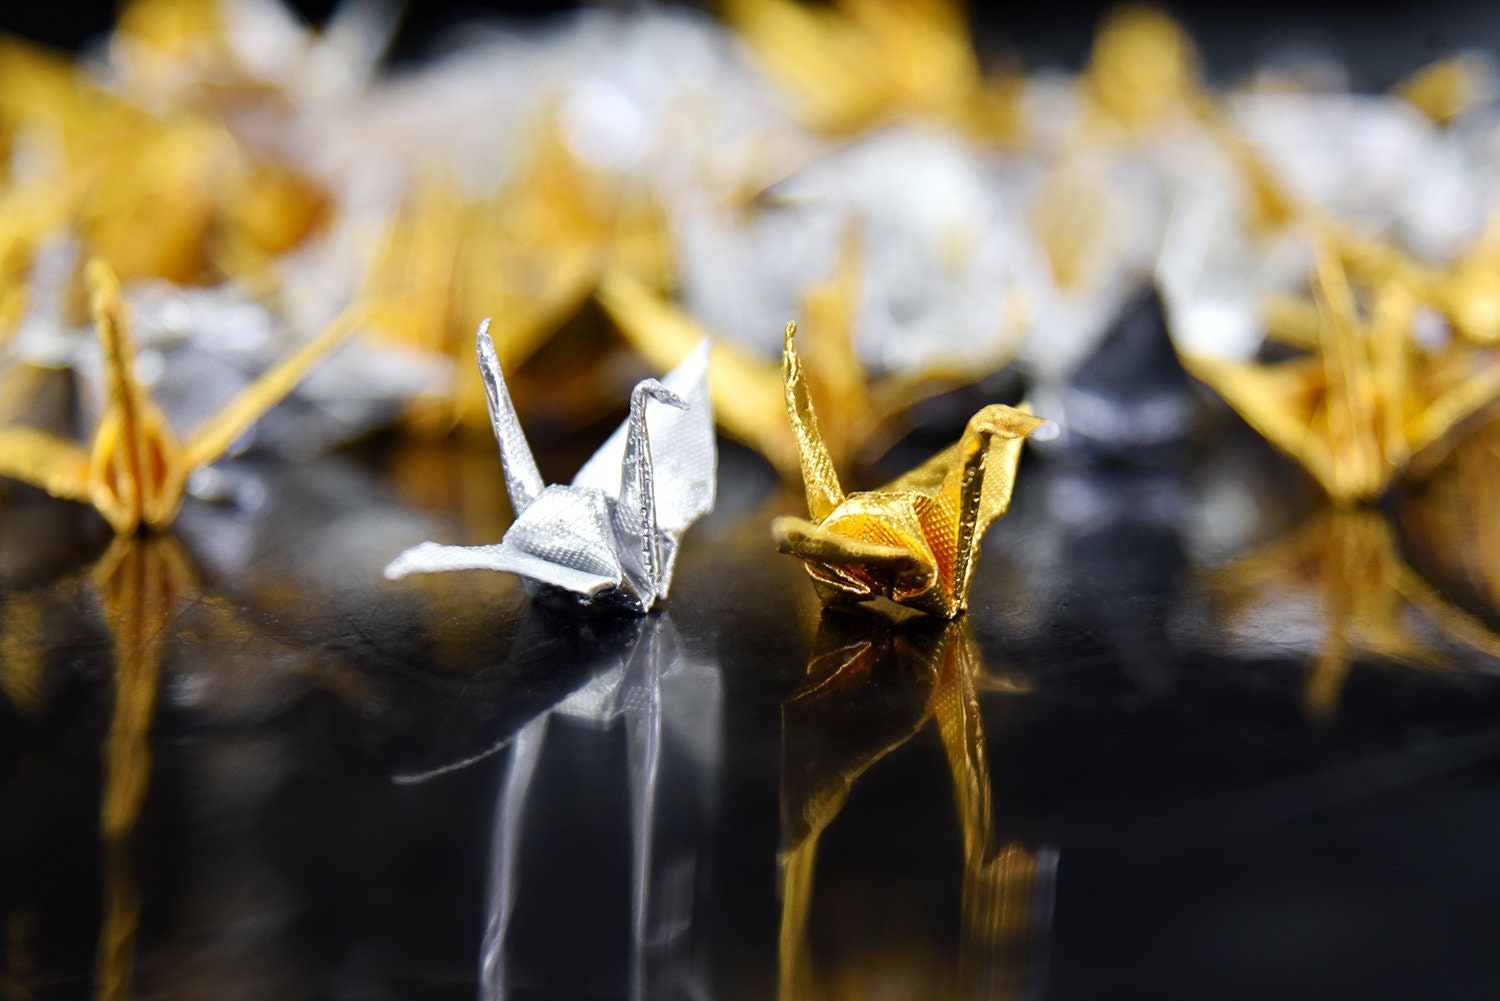 1000 Origami Paper Crane Gold Silver with Rose Pattern Small 1.5x1.5 inch - for Ornament, Wedding Gift, Decoration